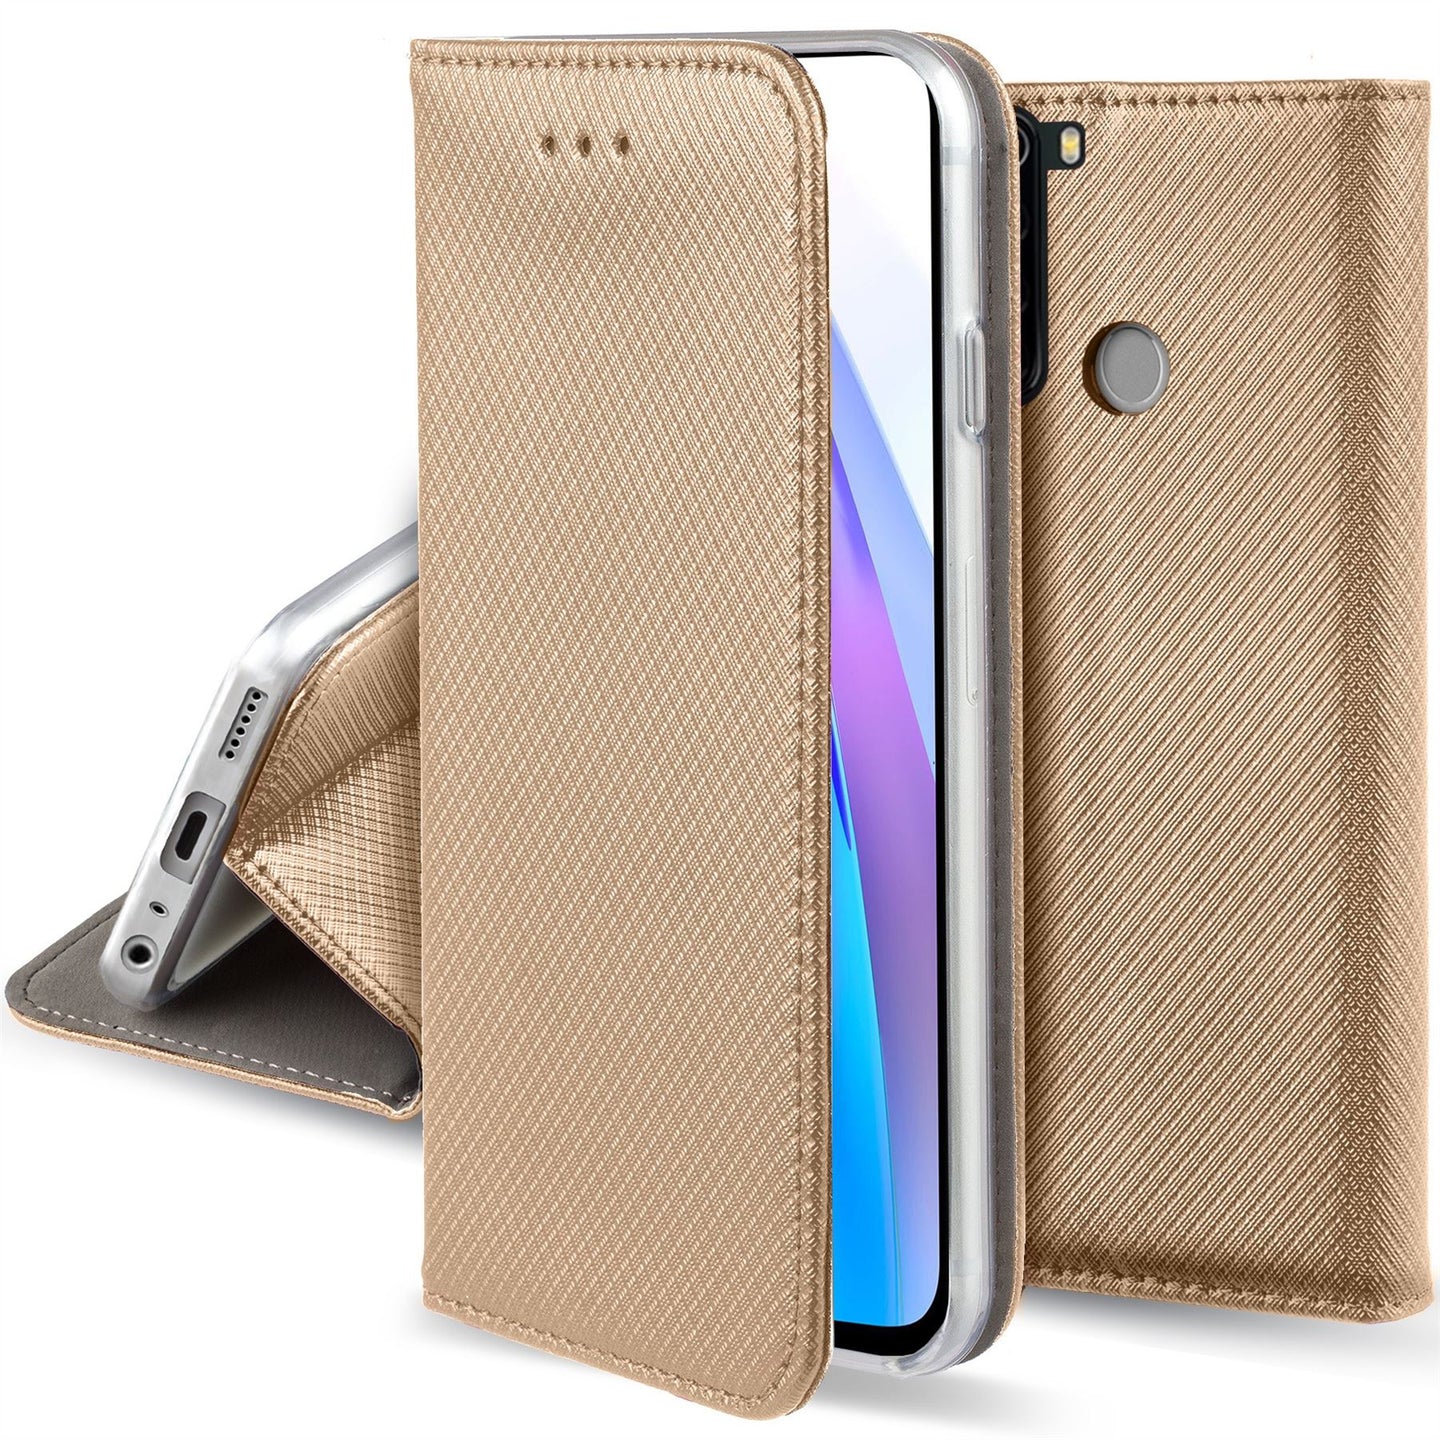 Moozy Case Flip Cover for Xiaomi Redmi Note 8T, Gold - Smart Magnetic Flip Case with Card Holder and Stand